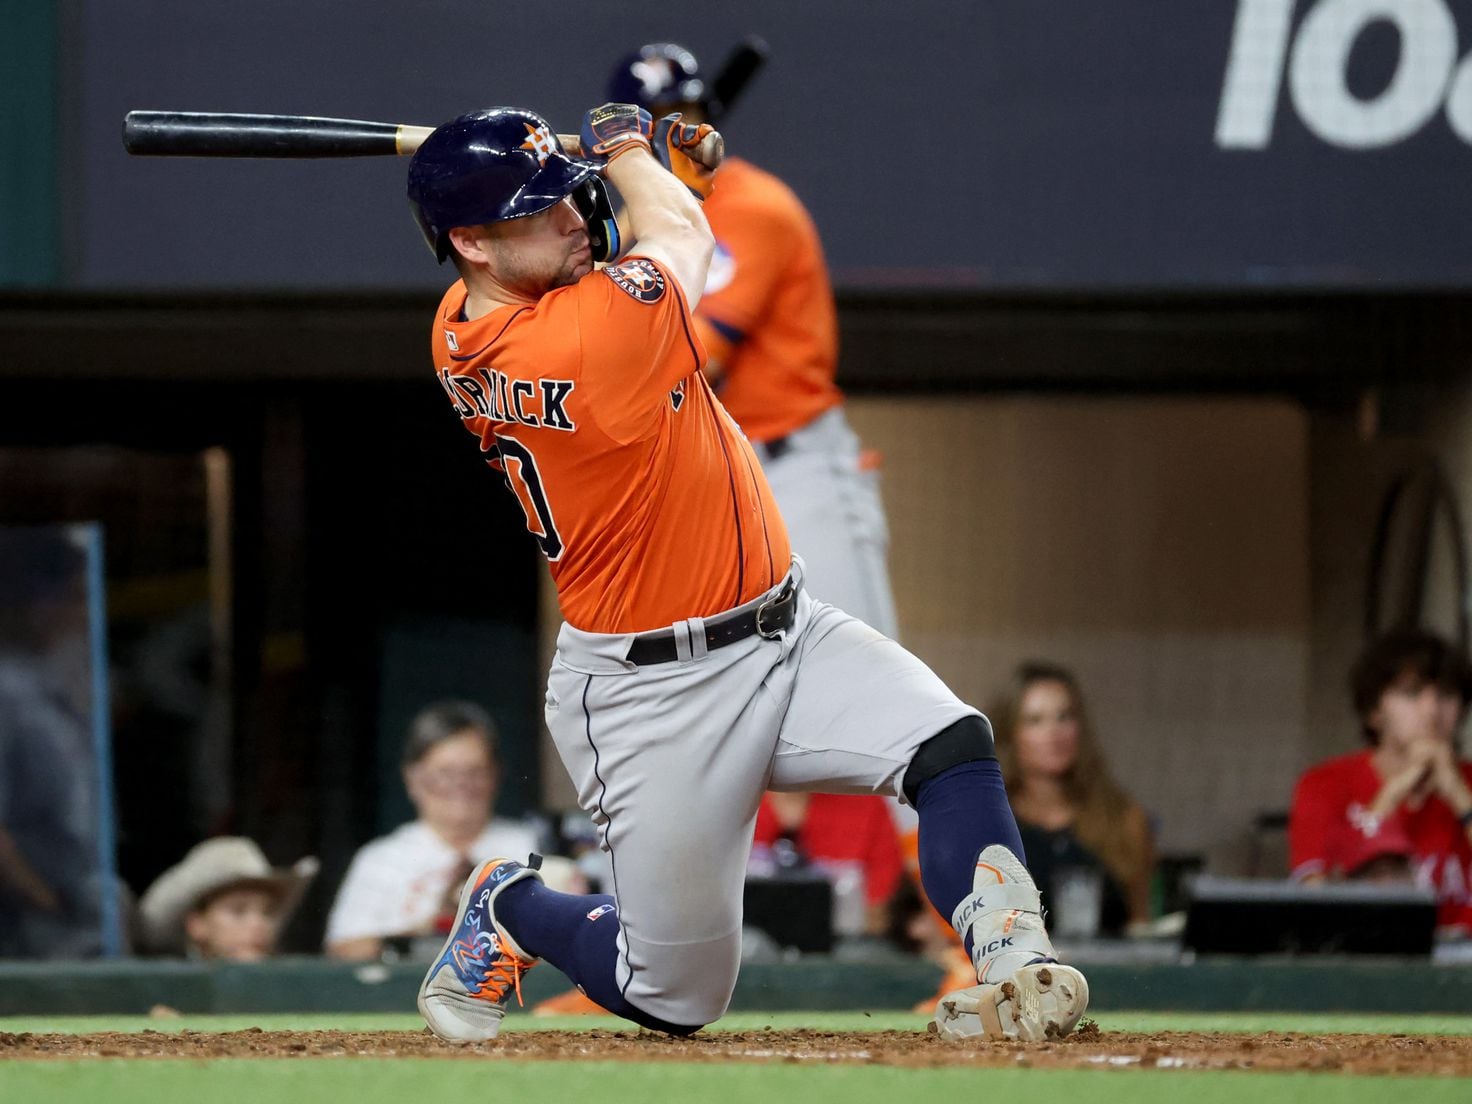 Rangers vs Astros Game 6 of the ALCS: pitchers, lineups, stats, etc. - AS  USA